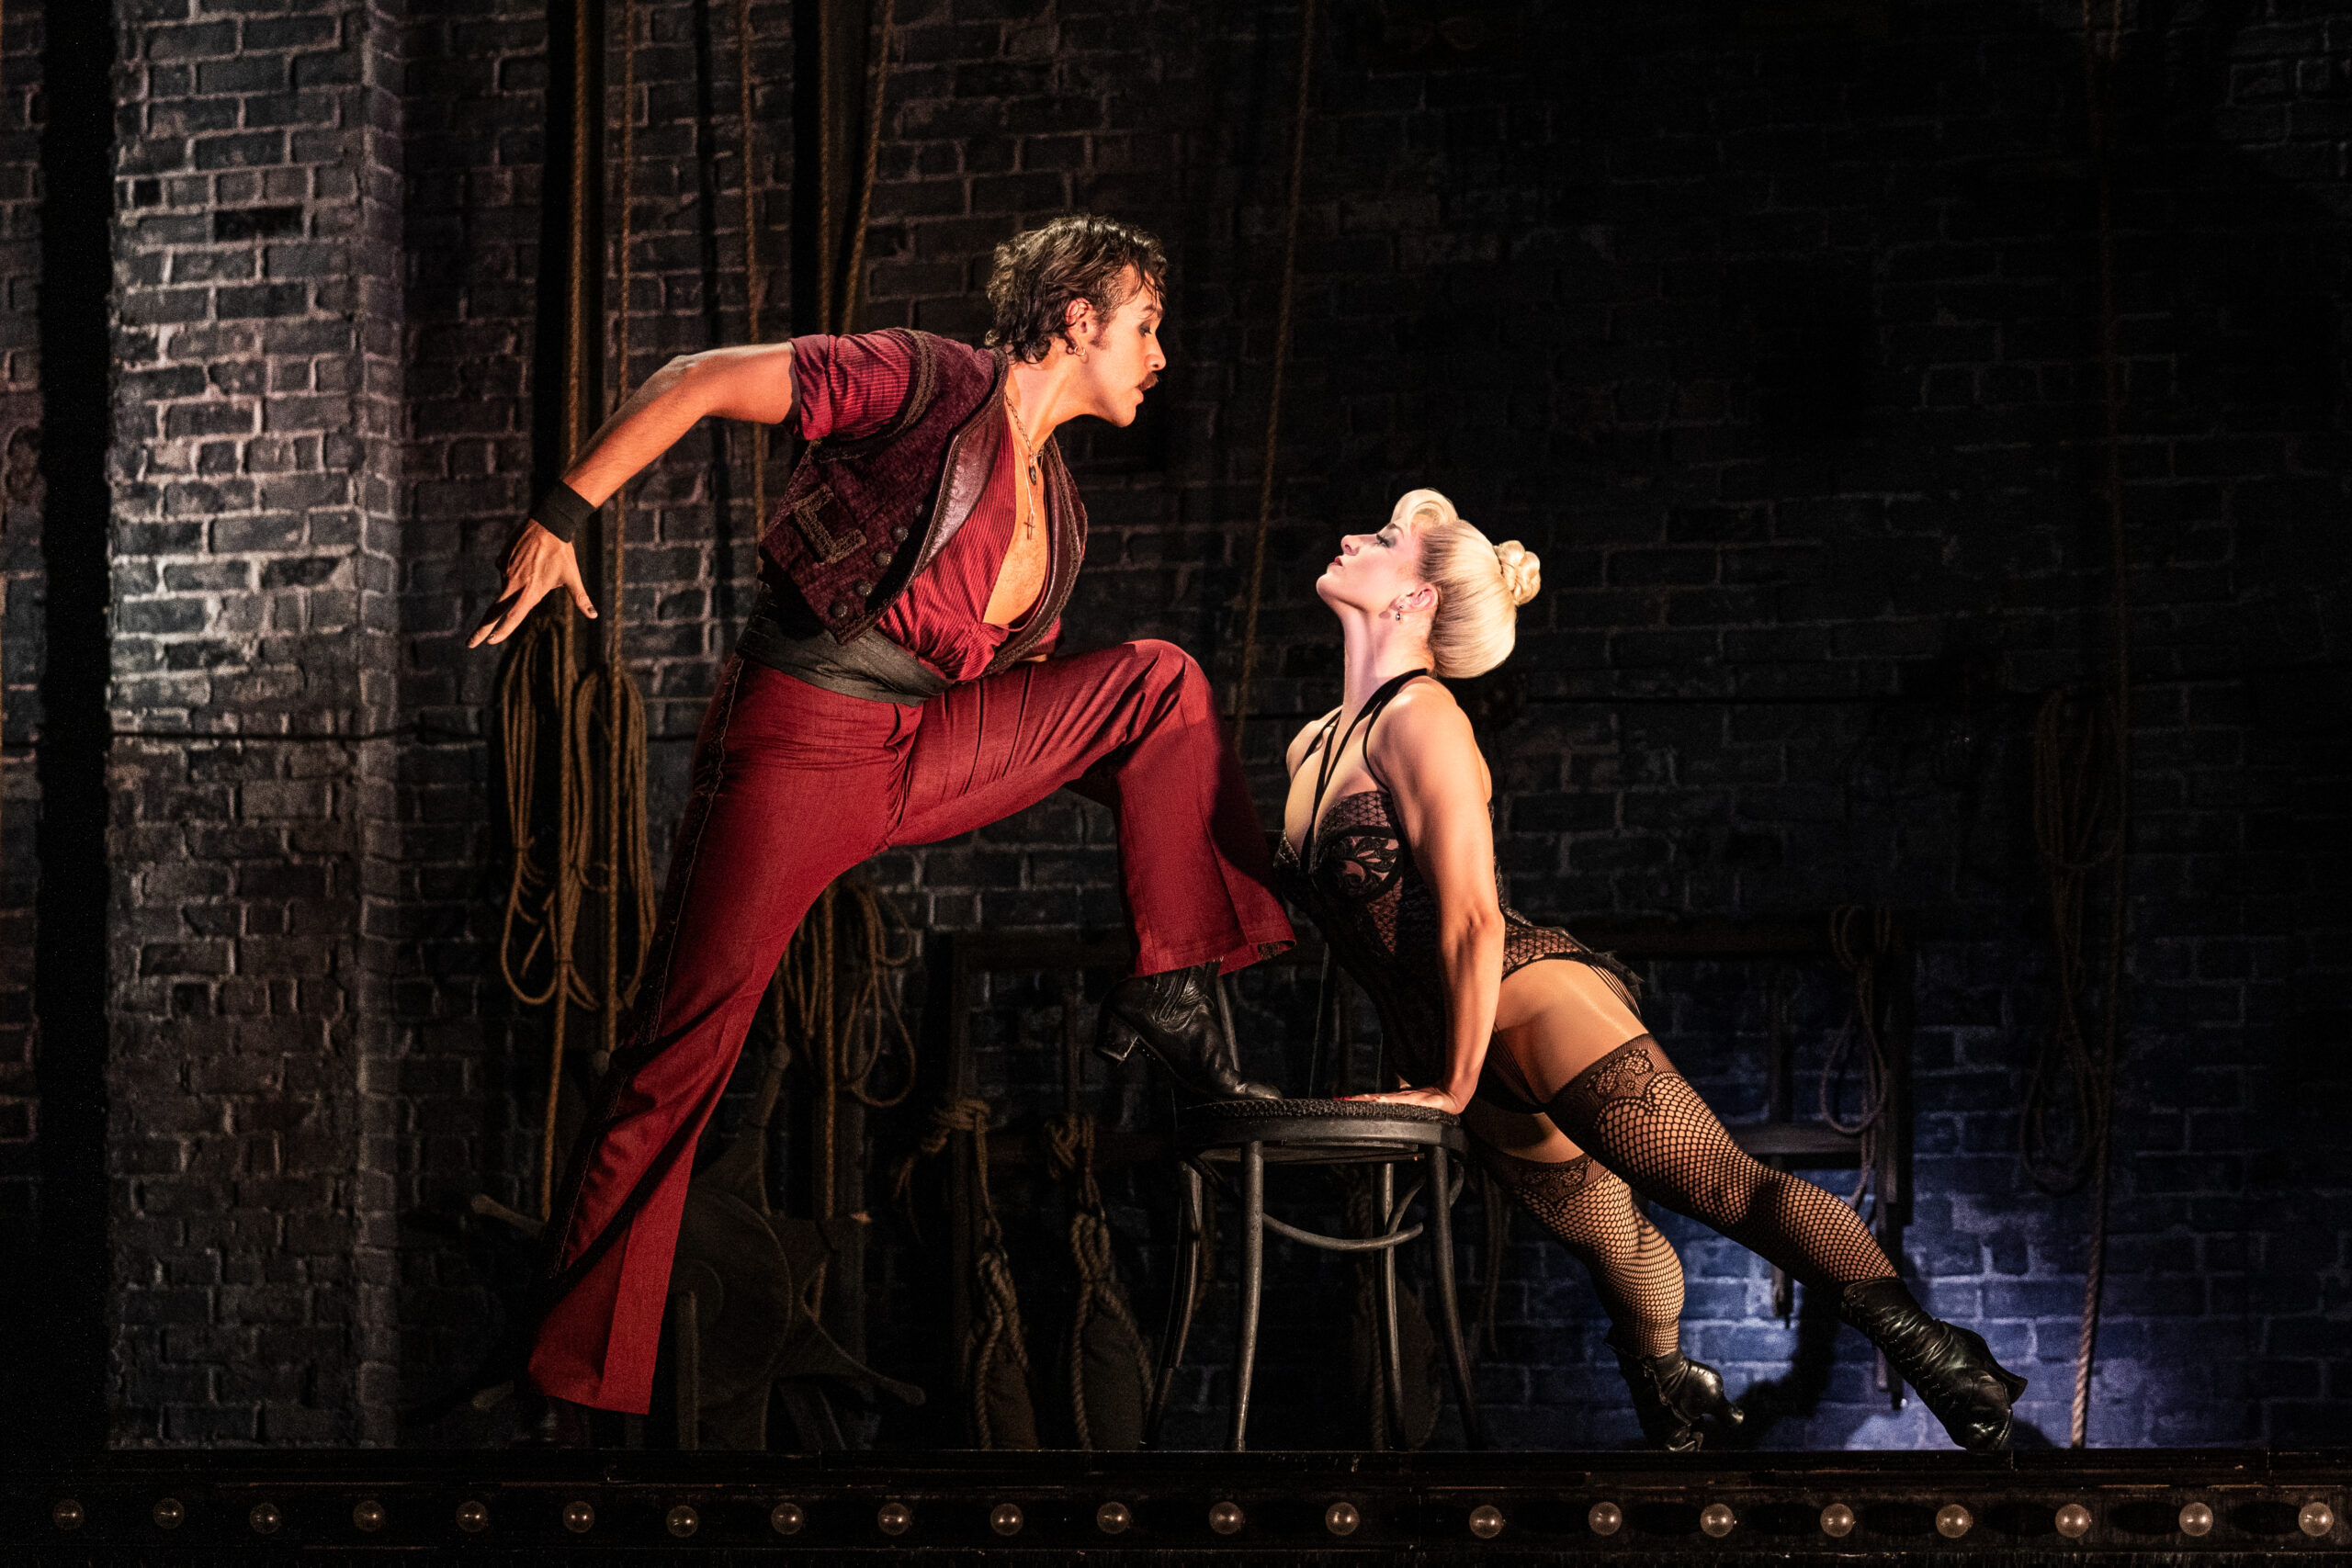 Caleb Marshall-Villarreal and Jessica Lee Goldyn in Moulin Rouge! The Musical. Photo by Matthew Murphy for MurphyMade.